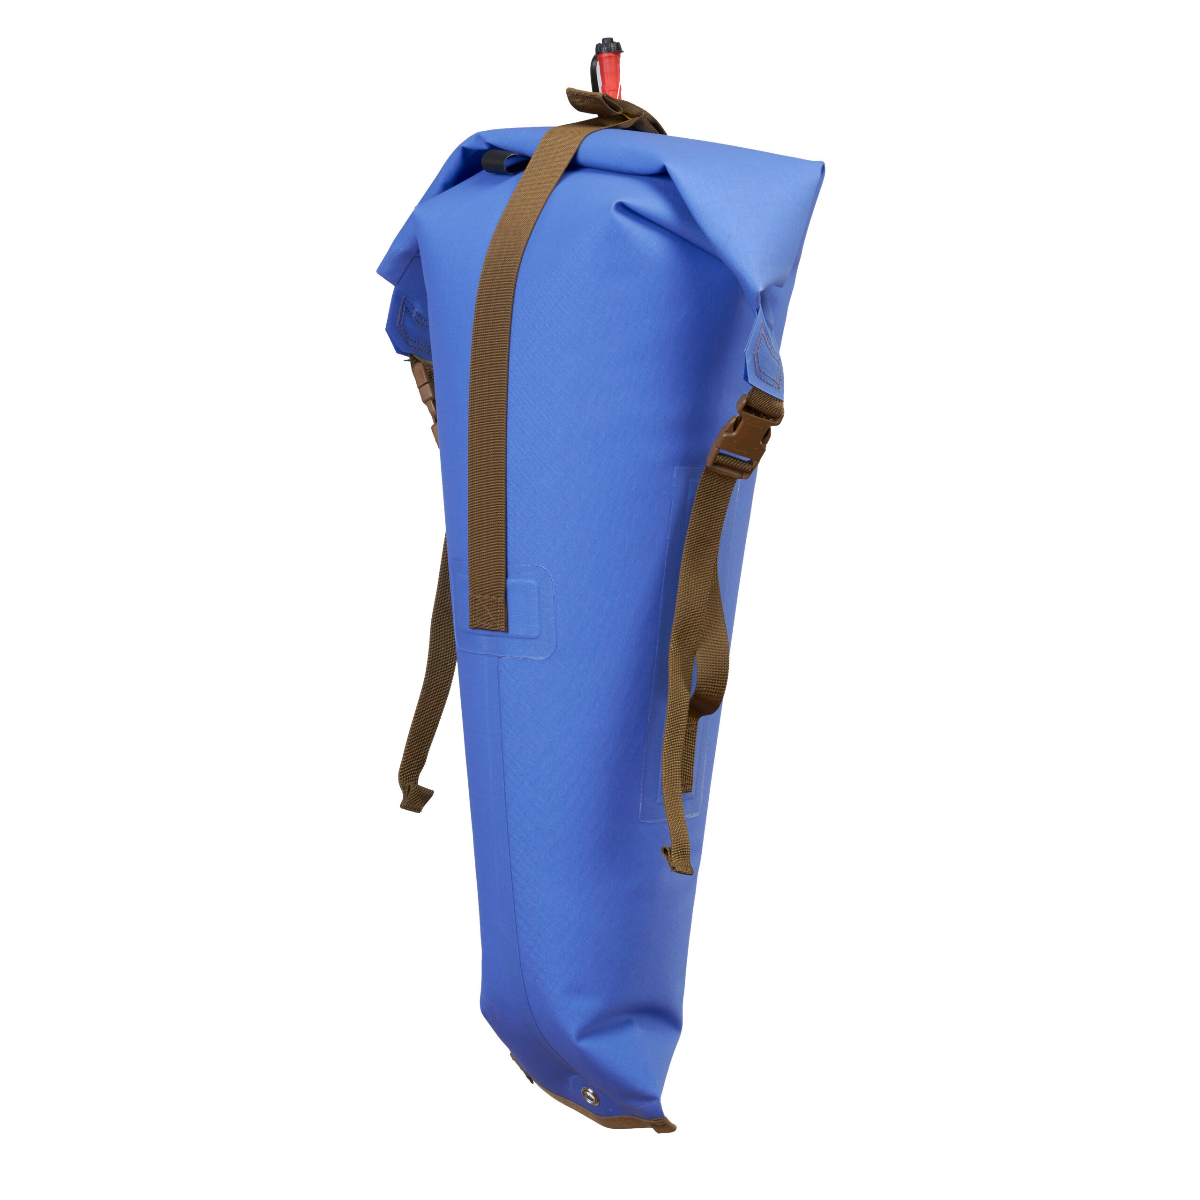 Featuring the Futa Kayak Stow Float dry bag, kayak flotation, kayak outfitting manufactured by Watershed shown here from a second angle.